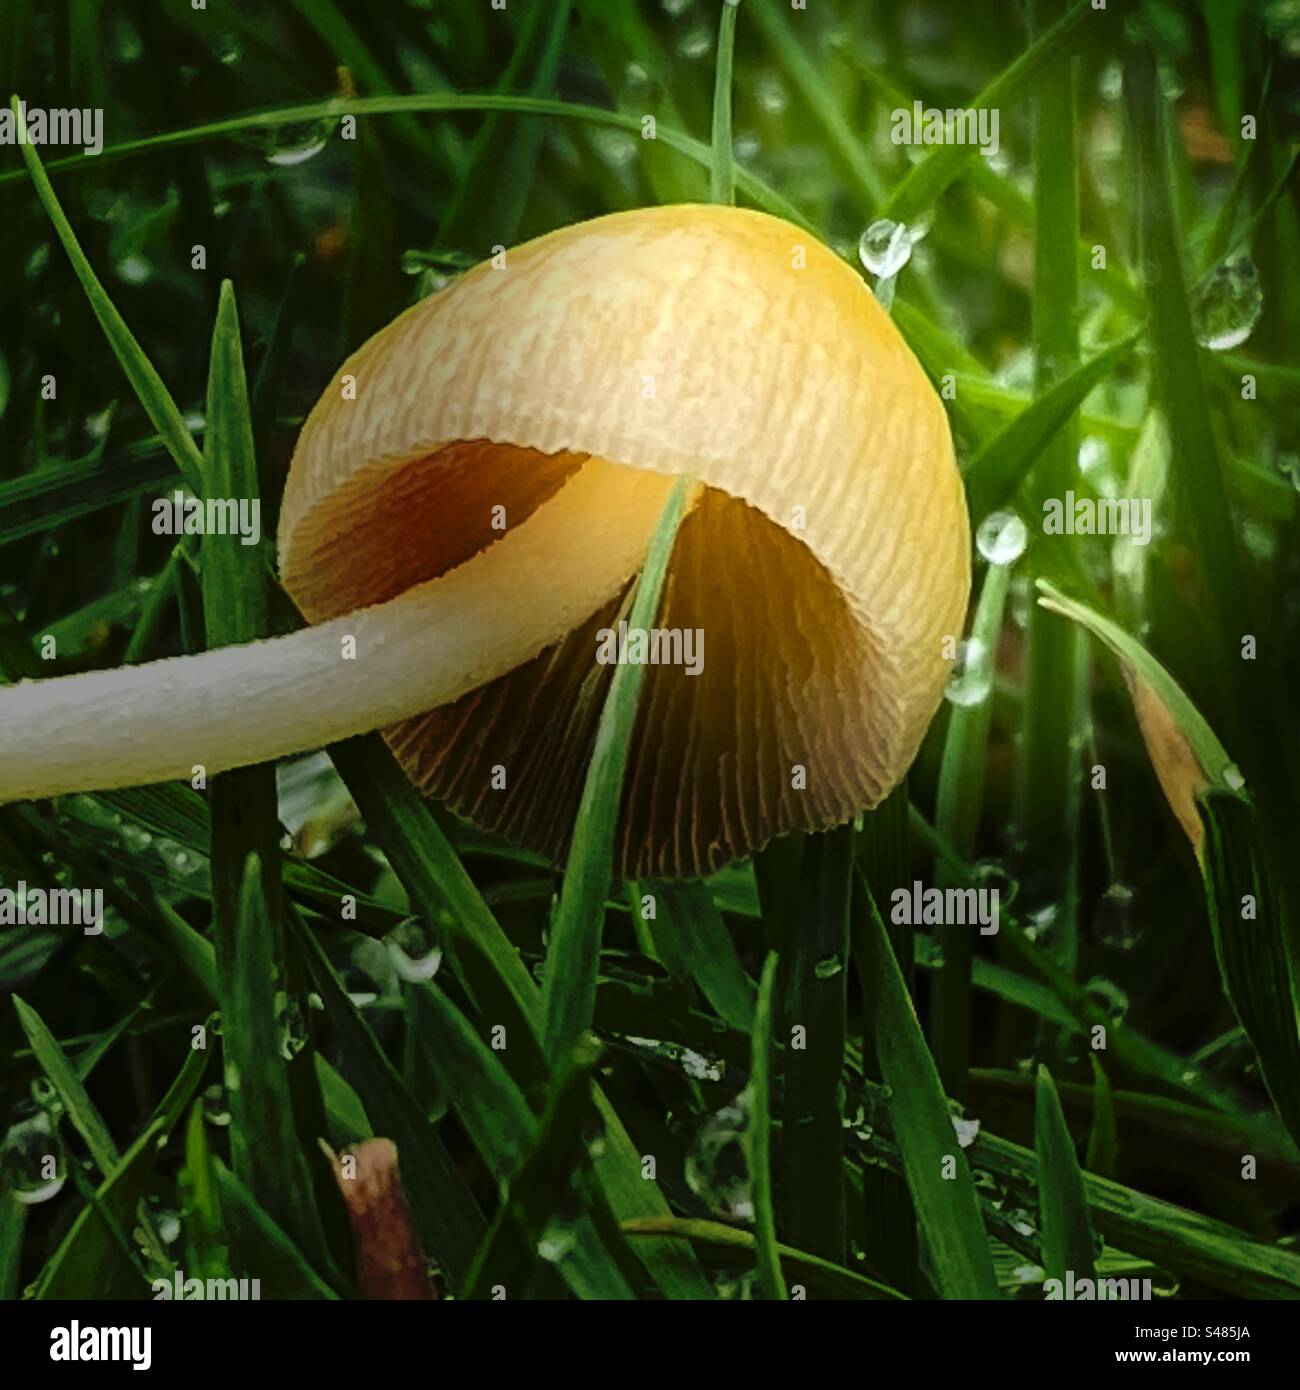 After the rain: A mushroom in the wet grass. Stock Photo